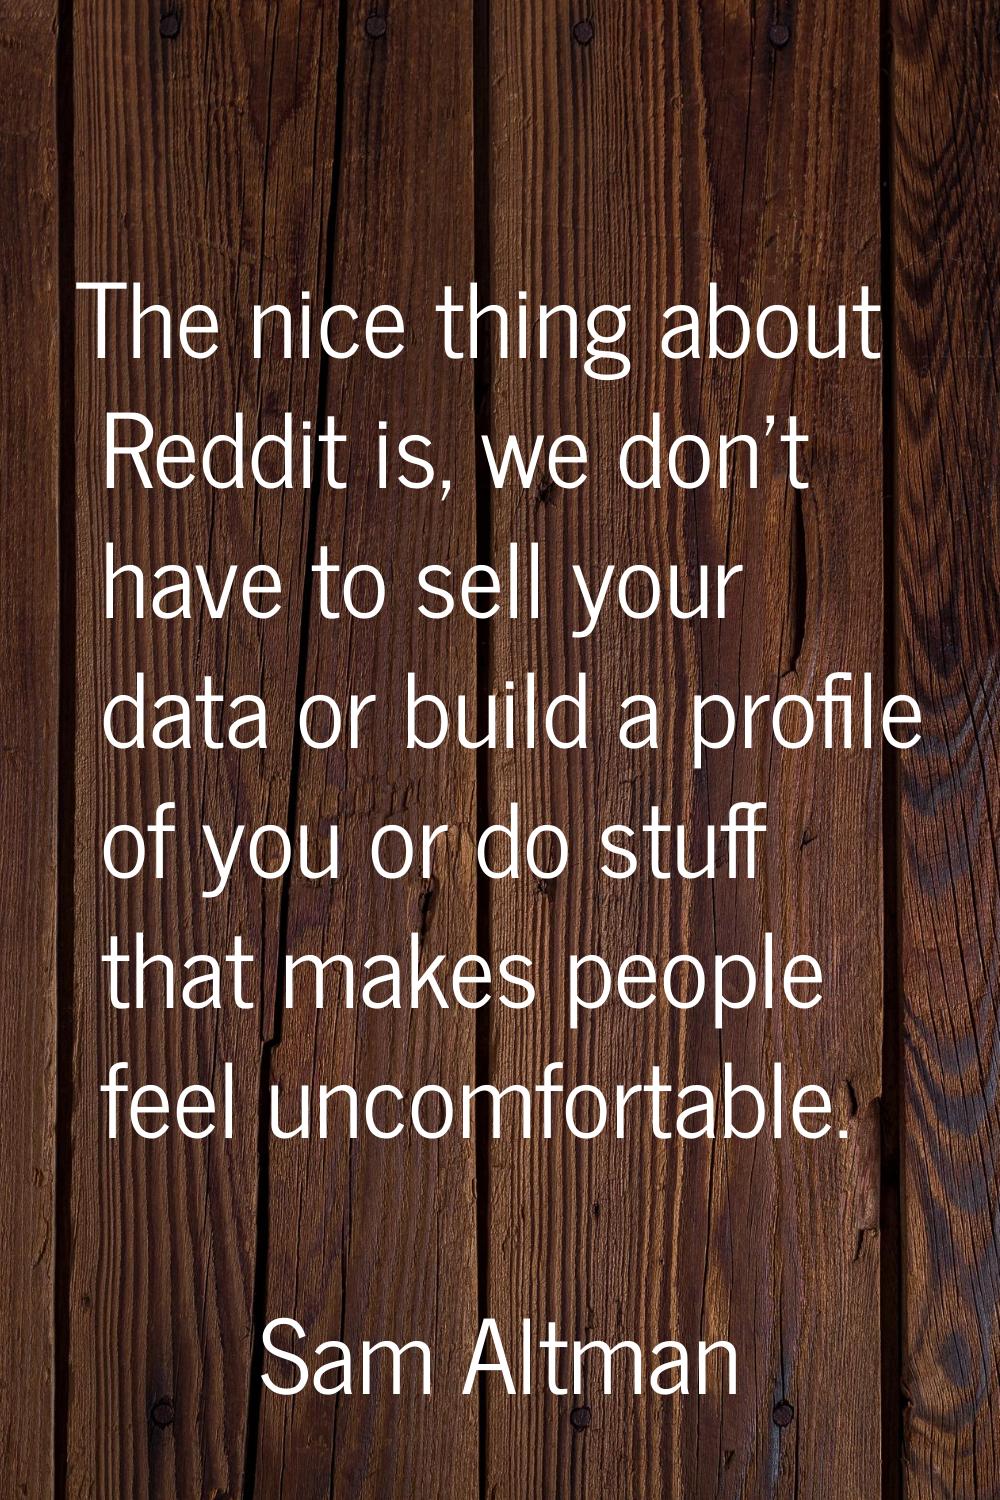 The nice thing about Reddit is, we don't have to sell your data or build a profile of you or do stu